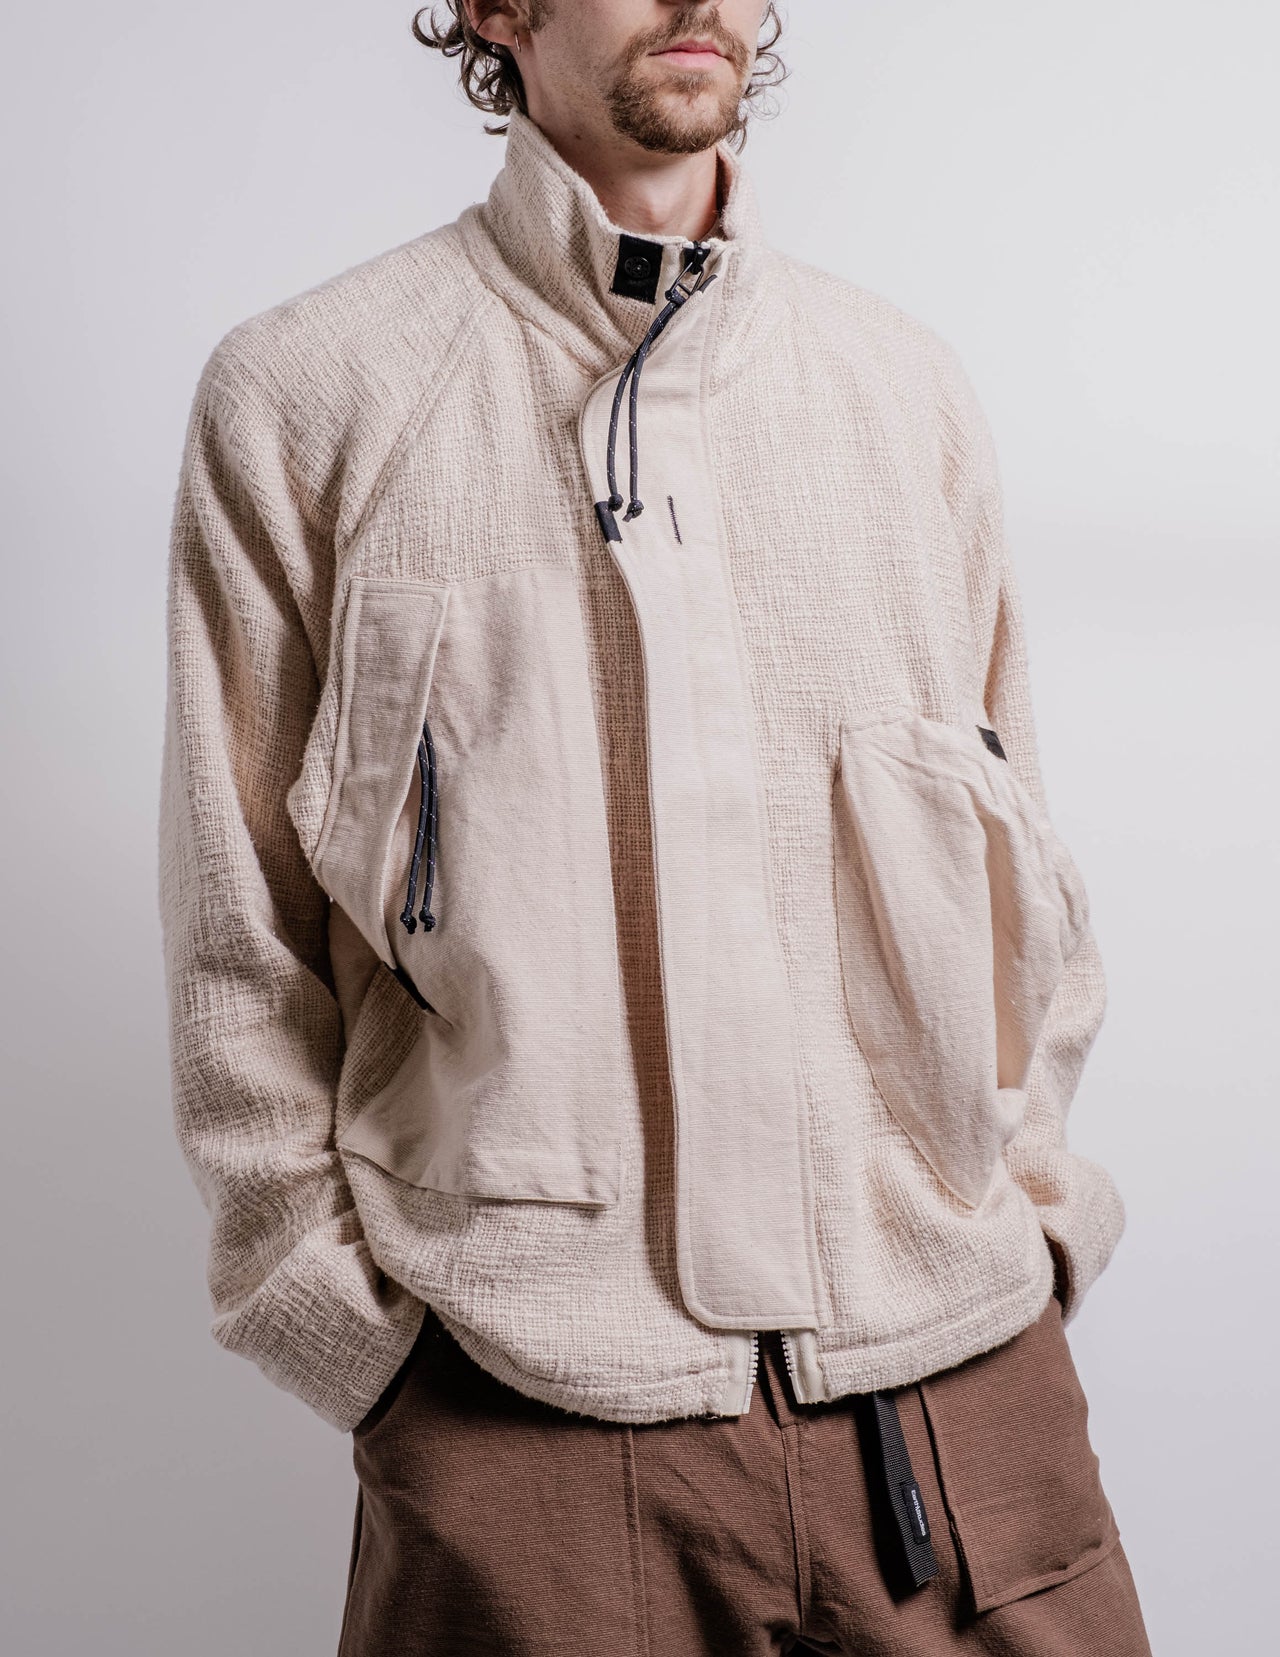 MS-106 Foraging Jacket in Chalk